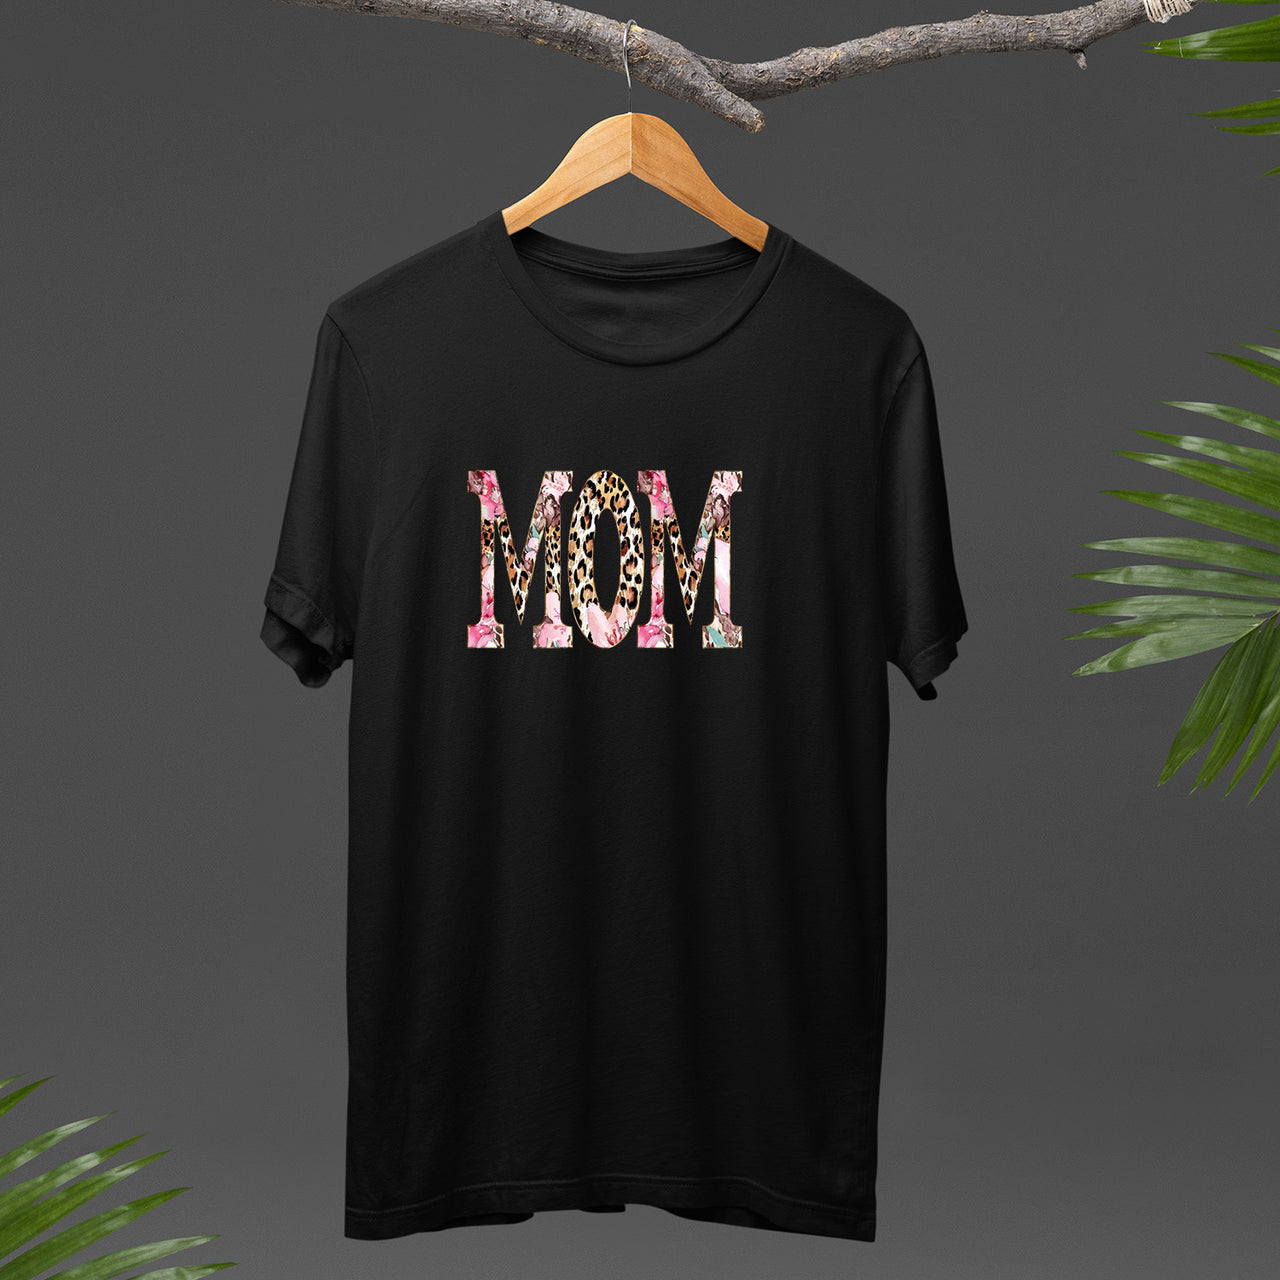 Leopard Print Mom Shirt, Retro Floral Mom T-shirt, Custom Mom Shirt, Mom Flower Shirt, Leopard Mom Life, Mama Shirt, Mom Shirt, Mother's Day Gift